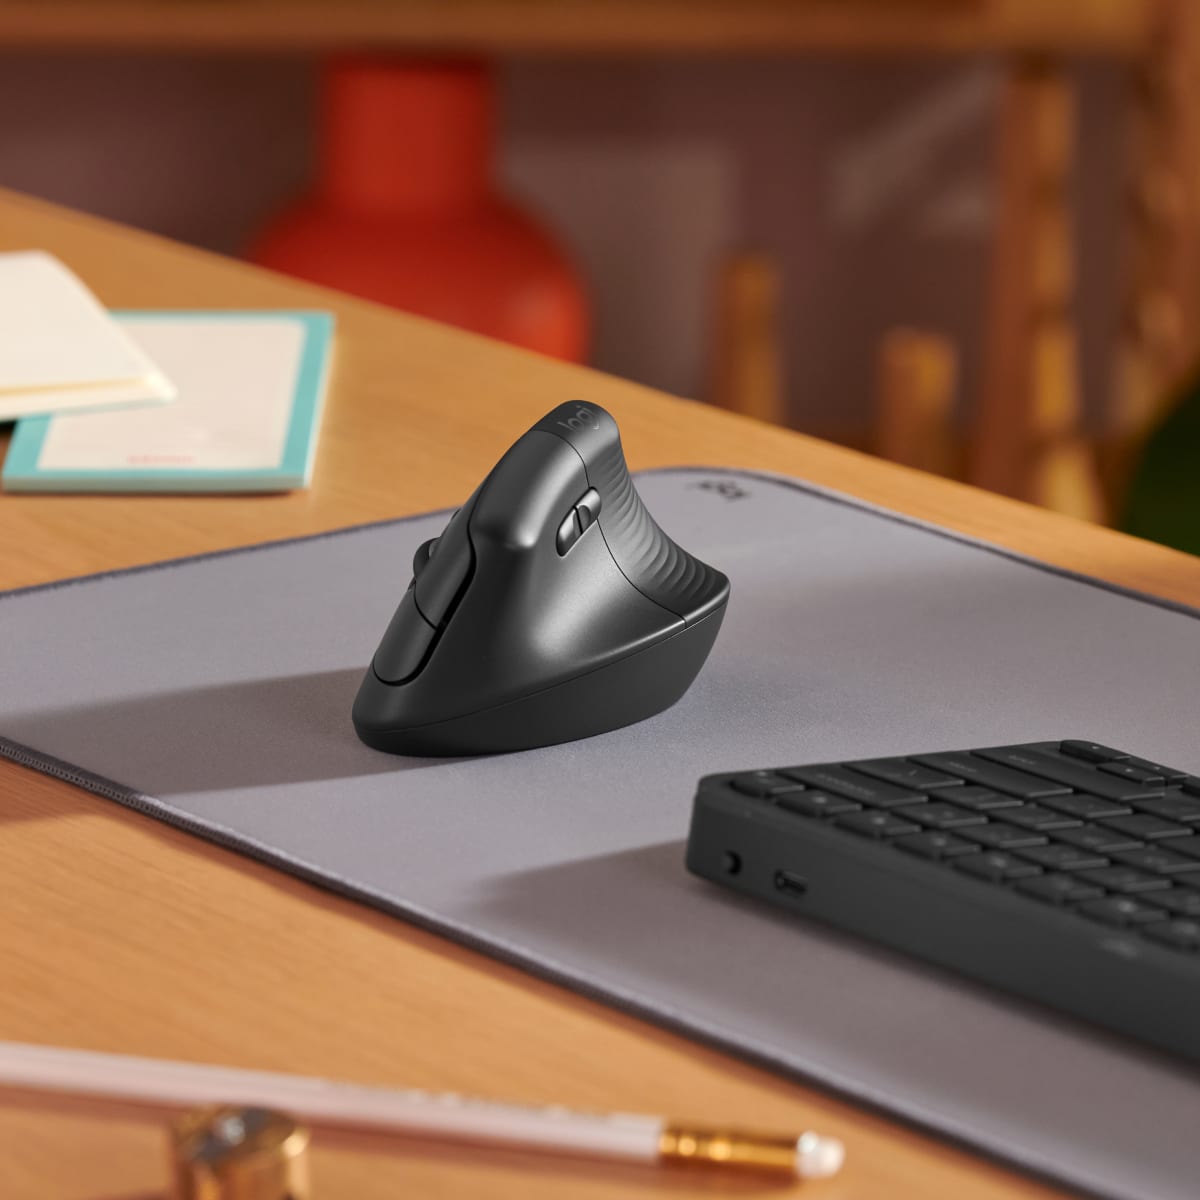 Logitech MX Vertical review: Not the mouse upgrade you're looking for